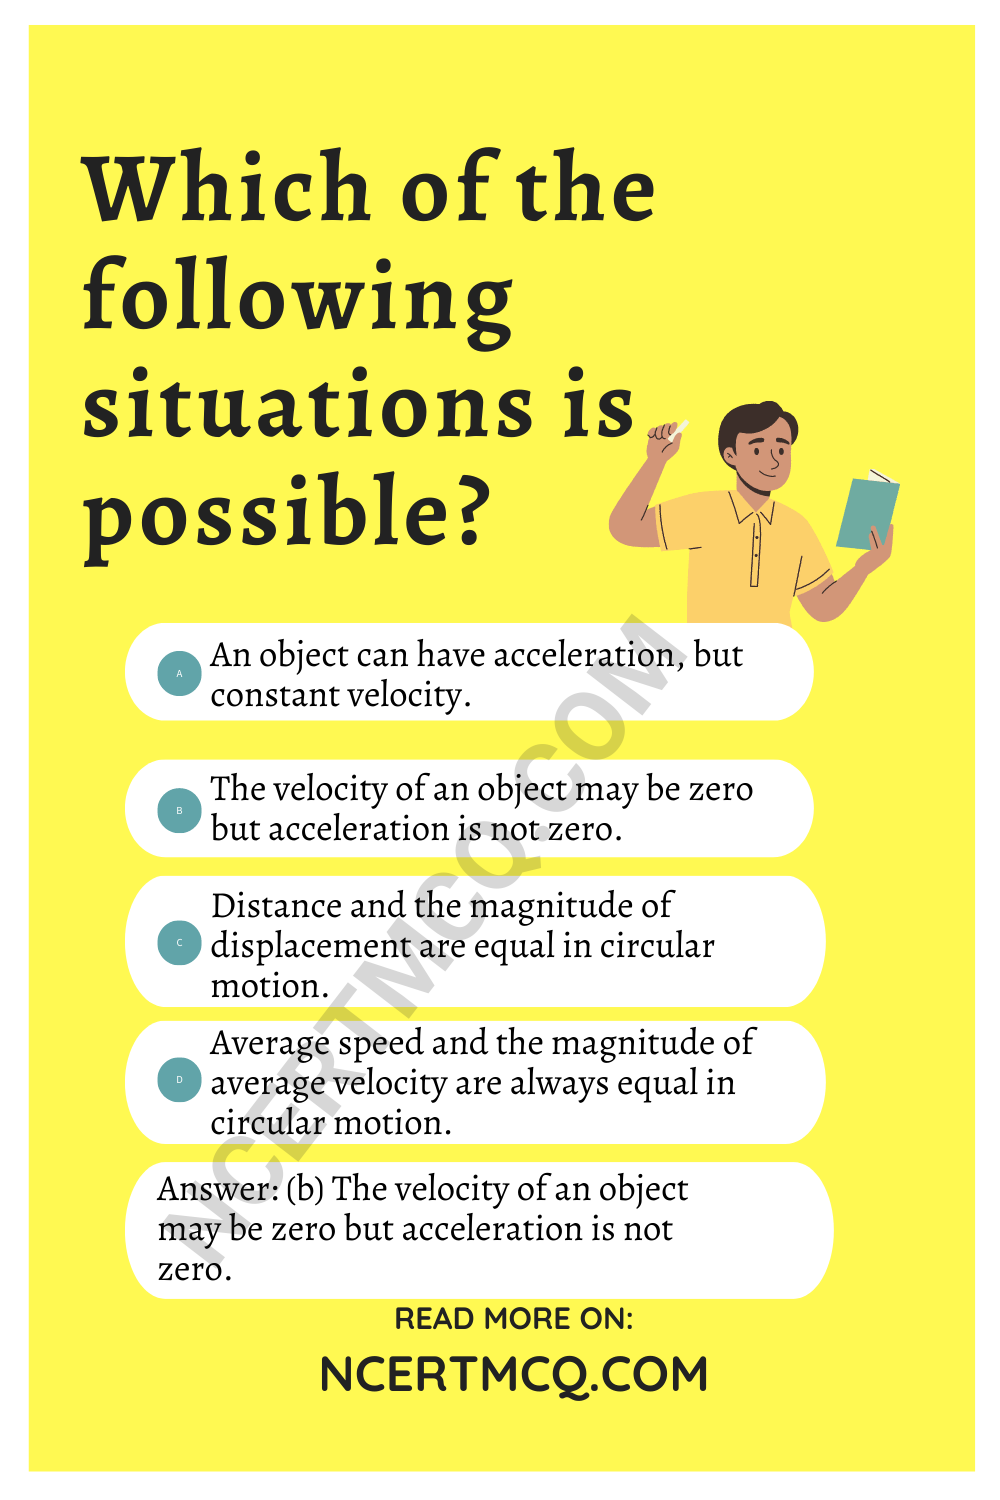 Which of the following situations is possible?